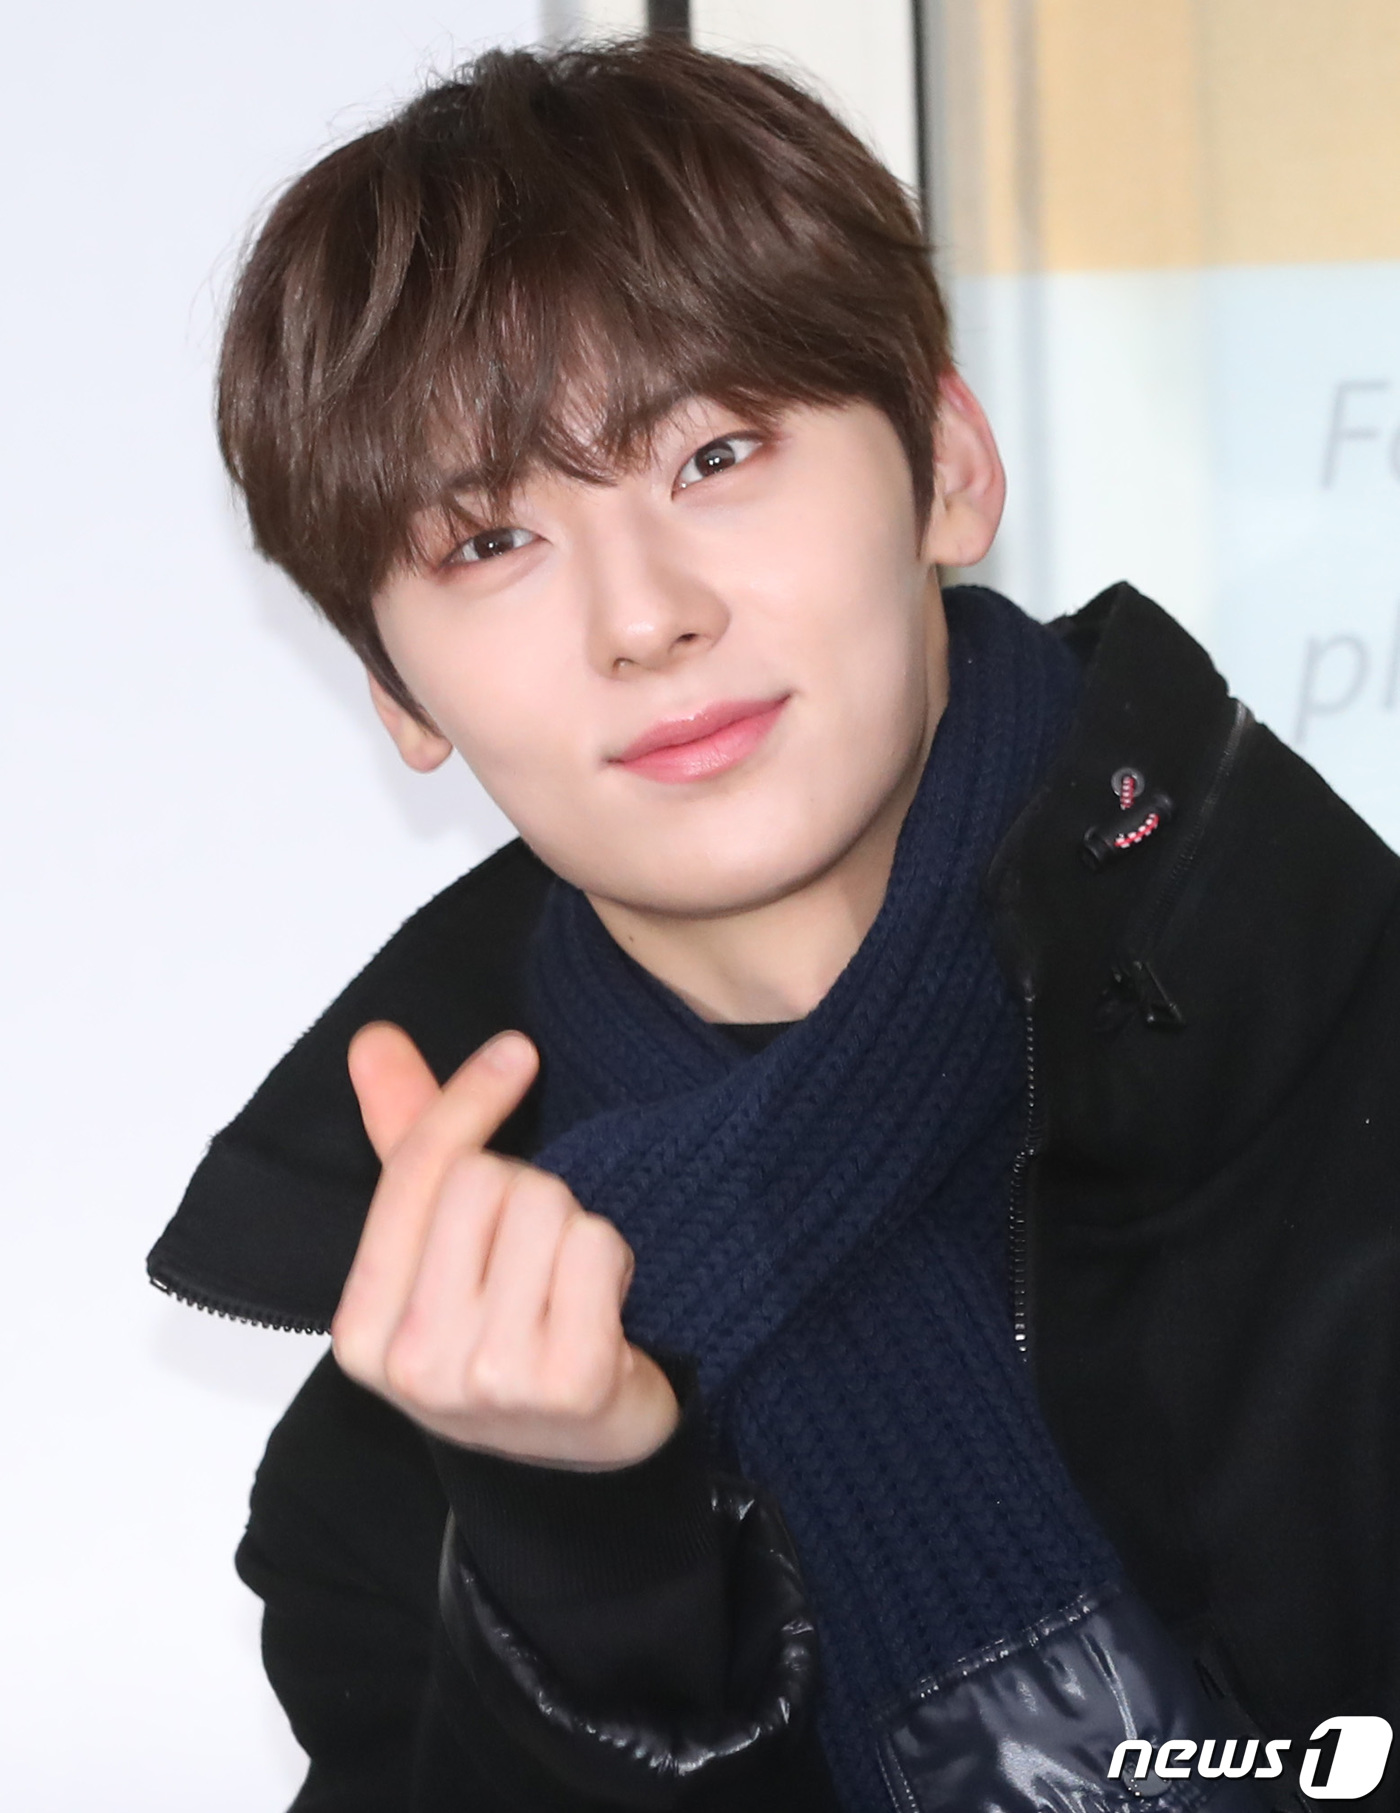 Incheon International Airport = = NUEST Hwang Min-hyun, a former Wanna One, is leaving for Milan, Italy via Incheon International Airport on the morning of the 19th to attend Fashion Week.